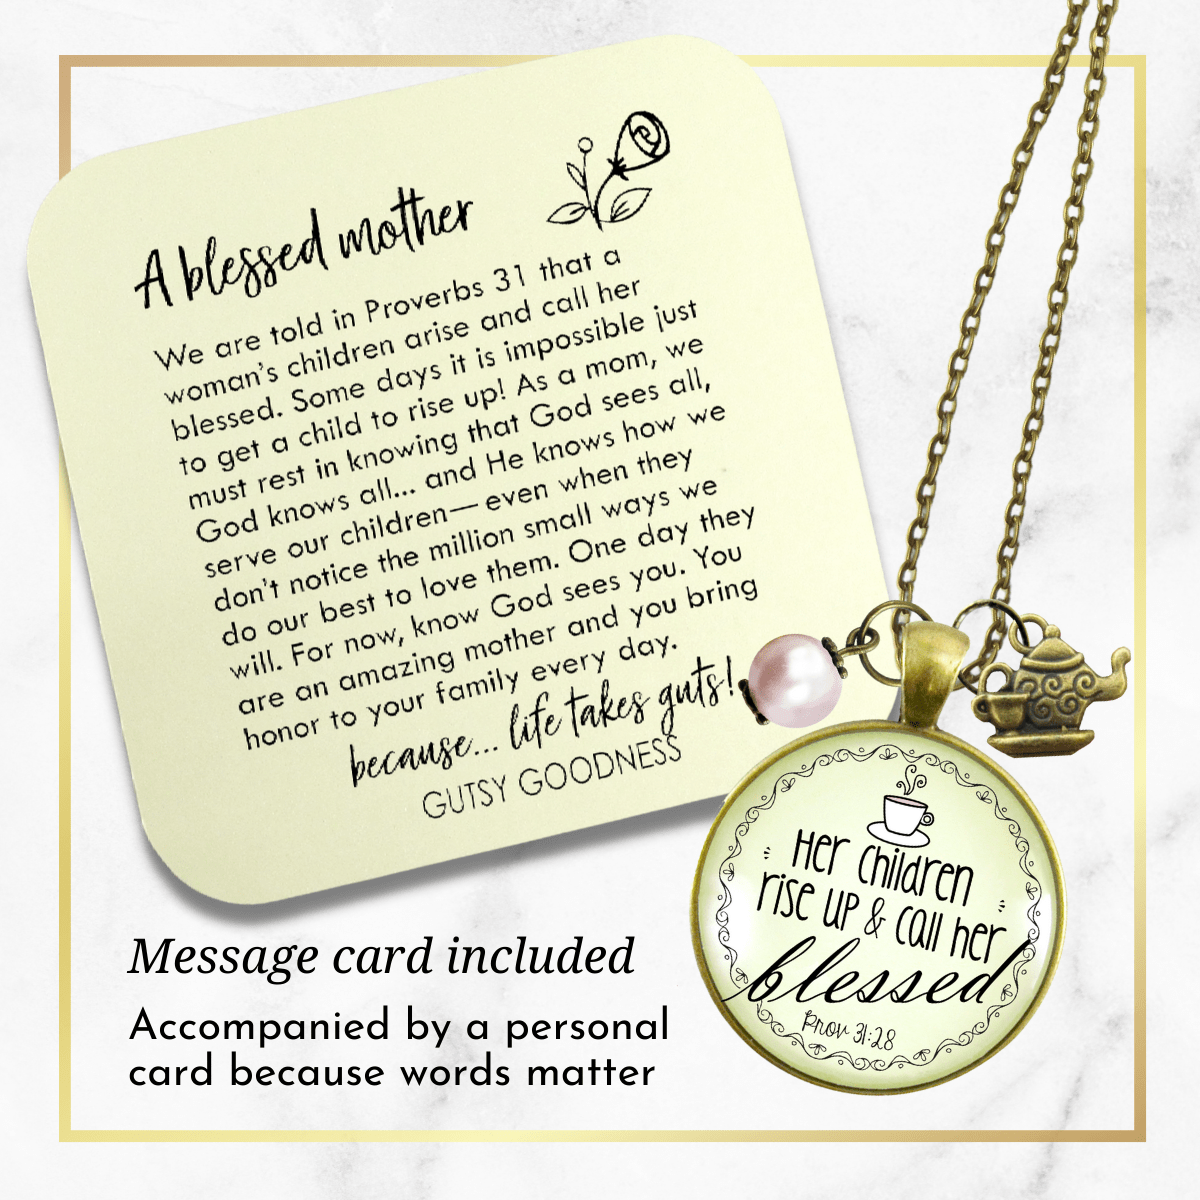 Gutsy Goodness Blessed Mother Necklace Proverb 31 Christian Mom Jewelry Teapot Charm - Gutsy Goodness;Blessed Mother Necklace Proverb 31 Christian Mom Jewelry Teapot Charm - Gutsy Goodness Handmade Jewelry Gifts